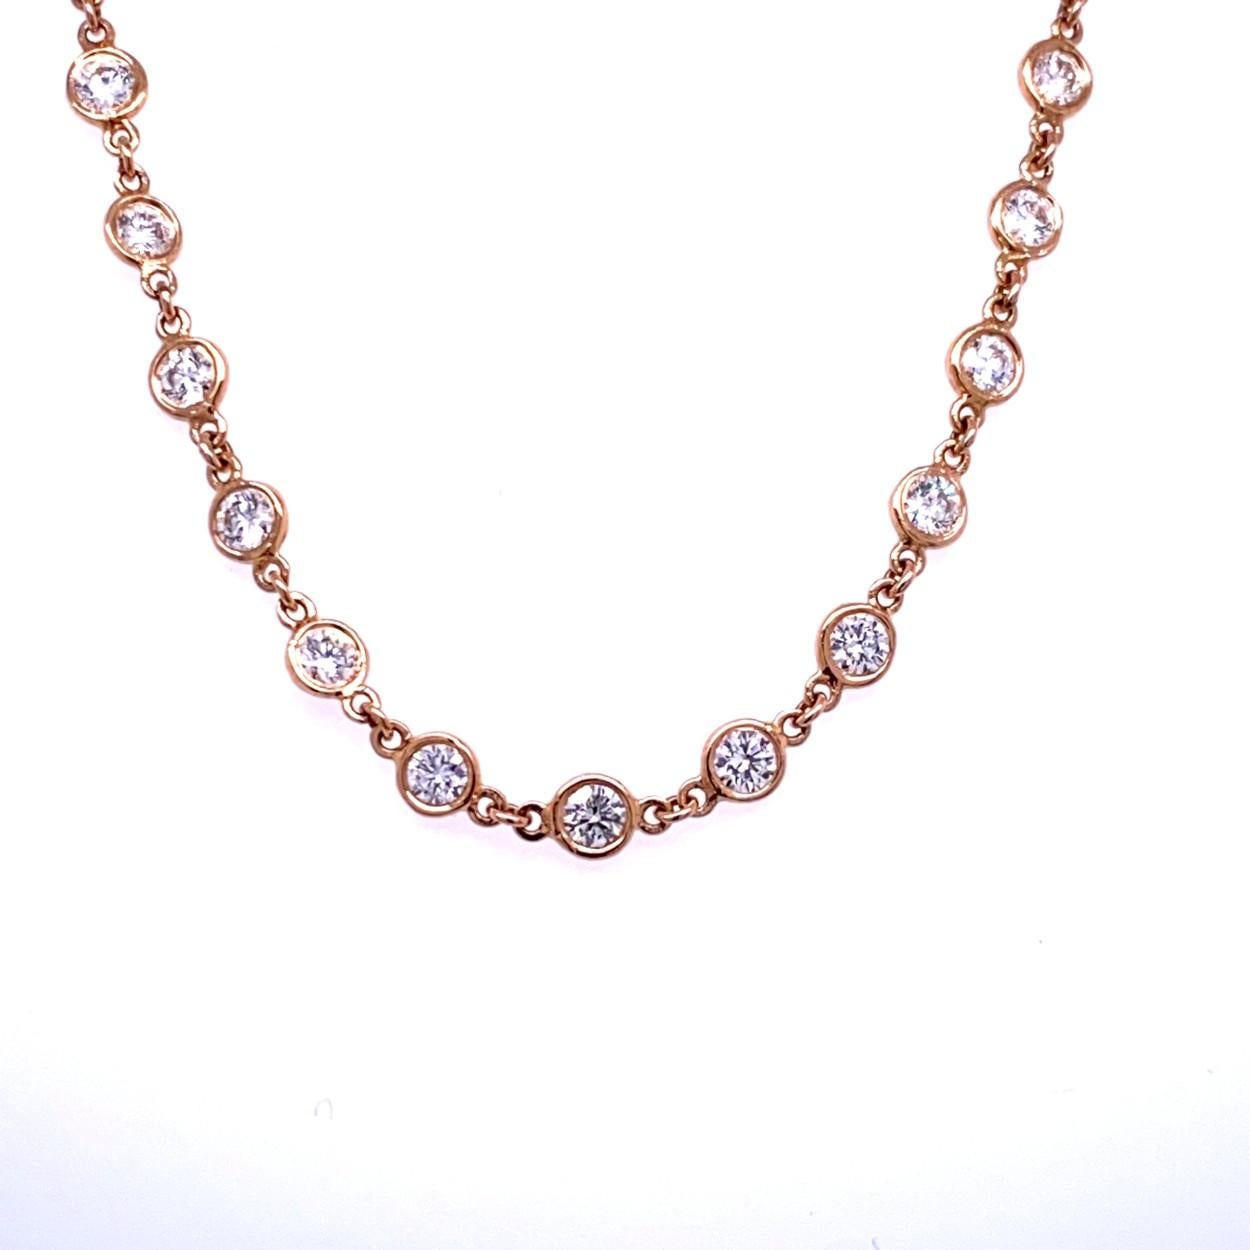 This Diamond Necklace consists of 69 Links Bezel Set 2.8mm Round Brilliant diamonds set in 18K Gold.   Available in White, Yellow, and Rose Color.
Total Weight of diamonds: 5.95 Ct 
Total Weight of bracelet: 10.1 gr